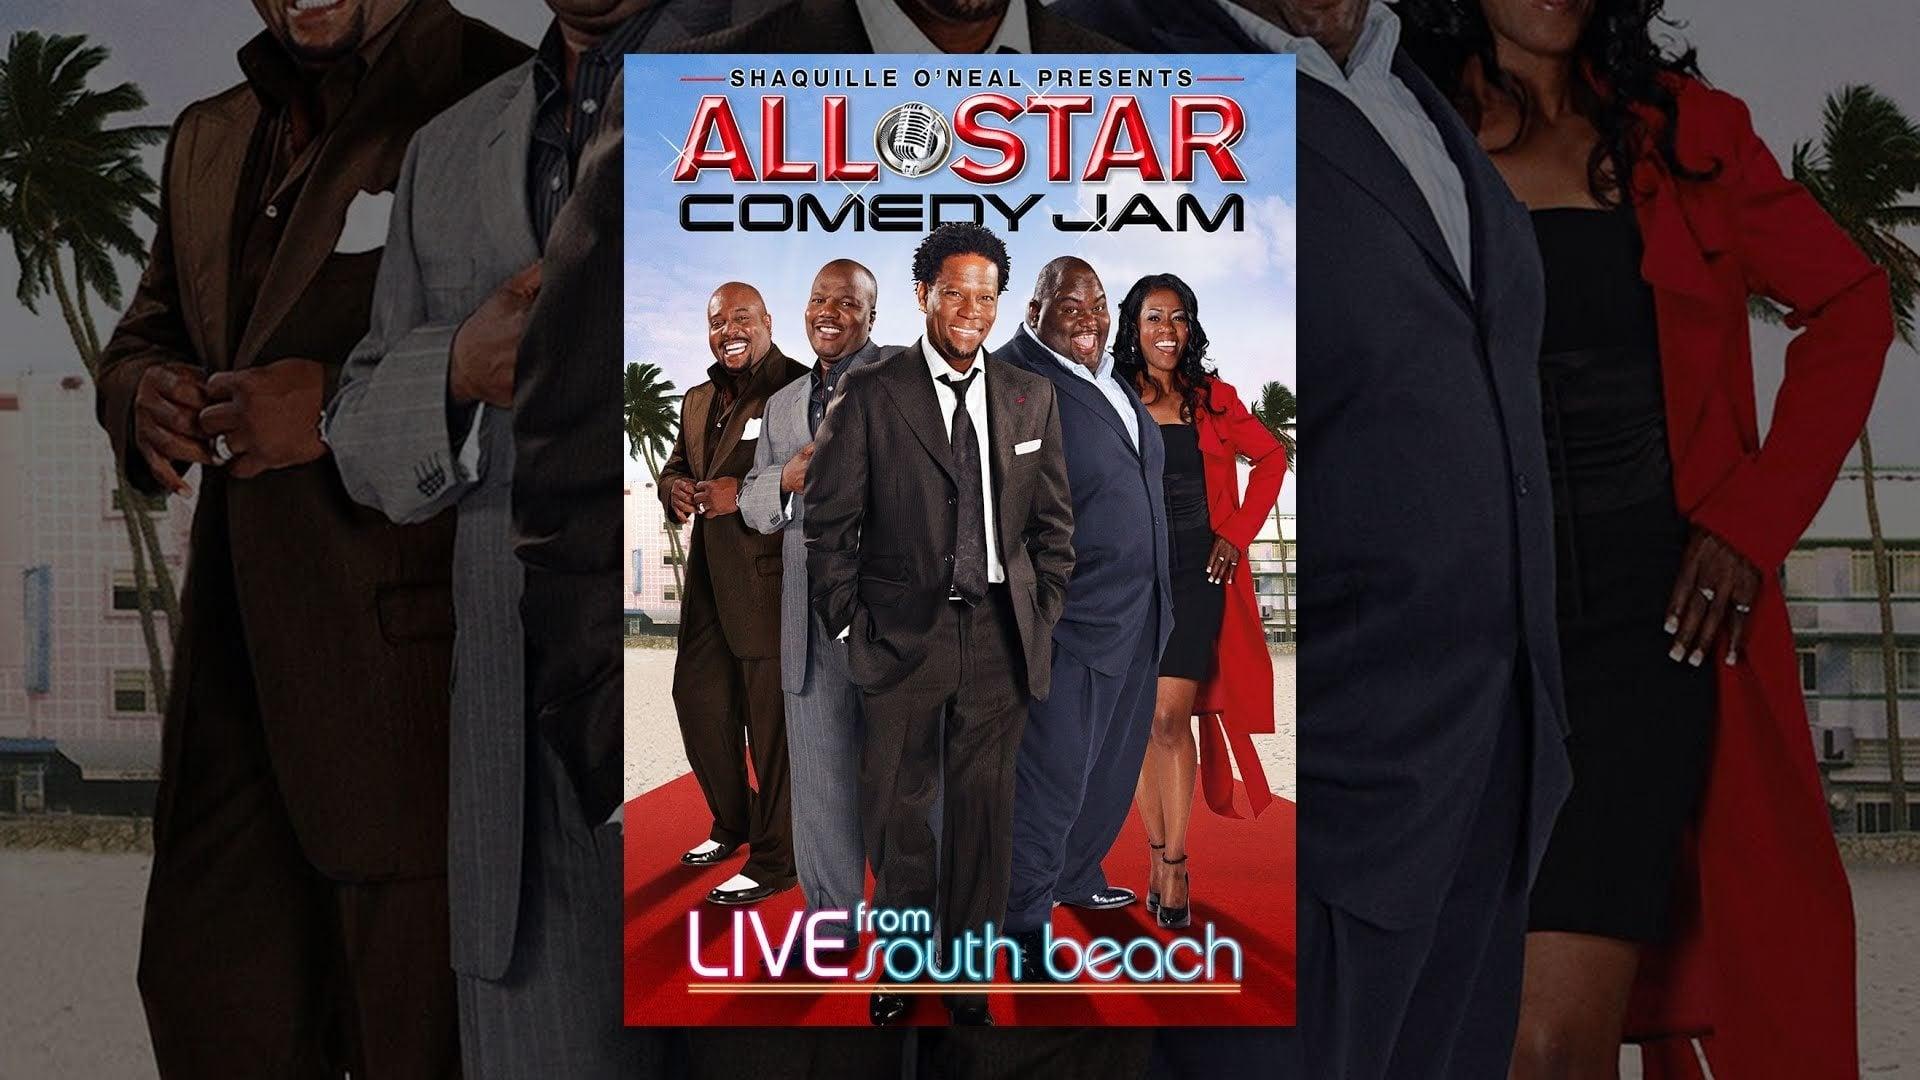 All Star Comedy Jam: Live from South Beach backdrop